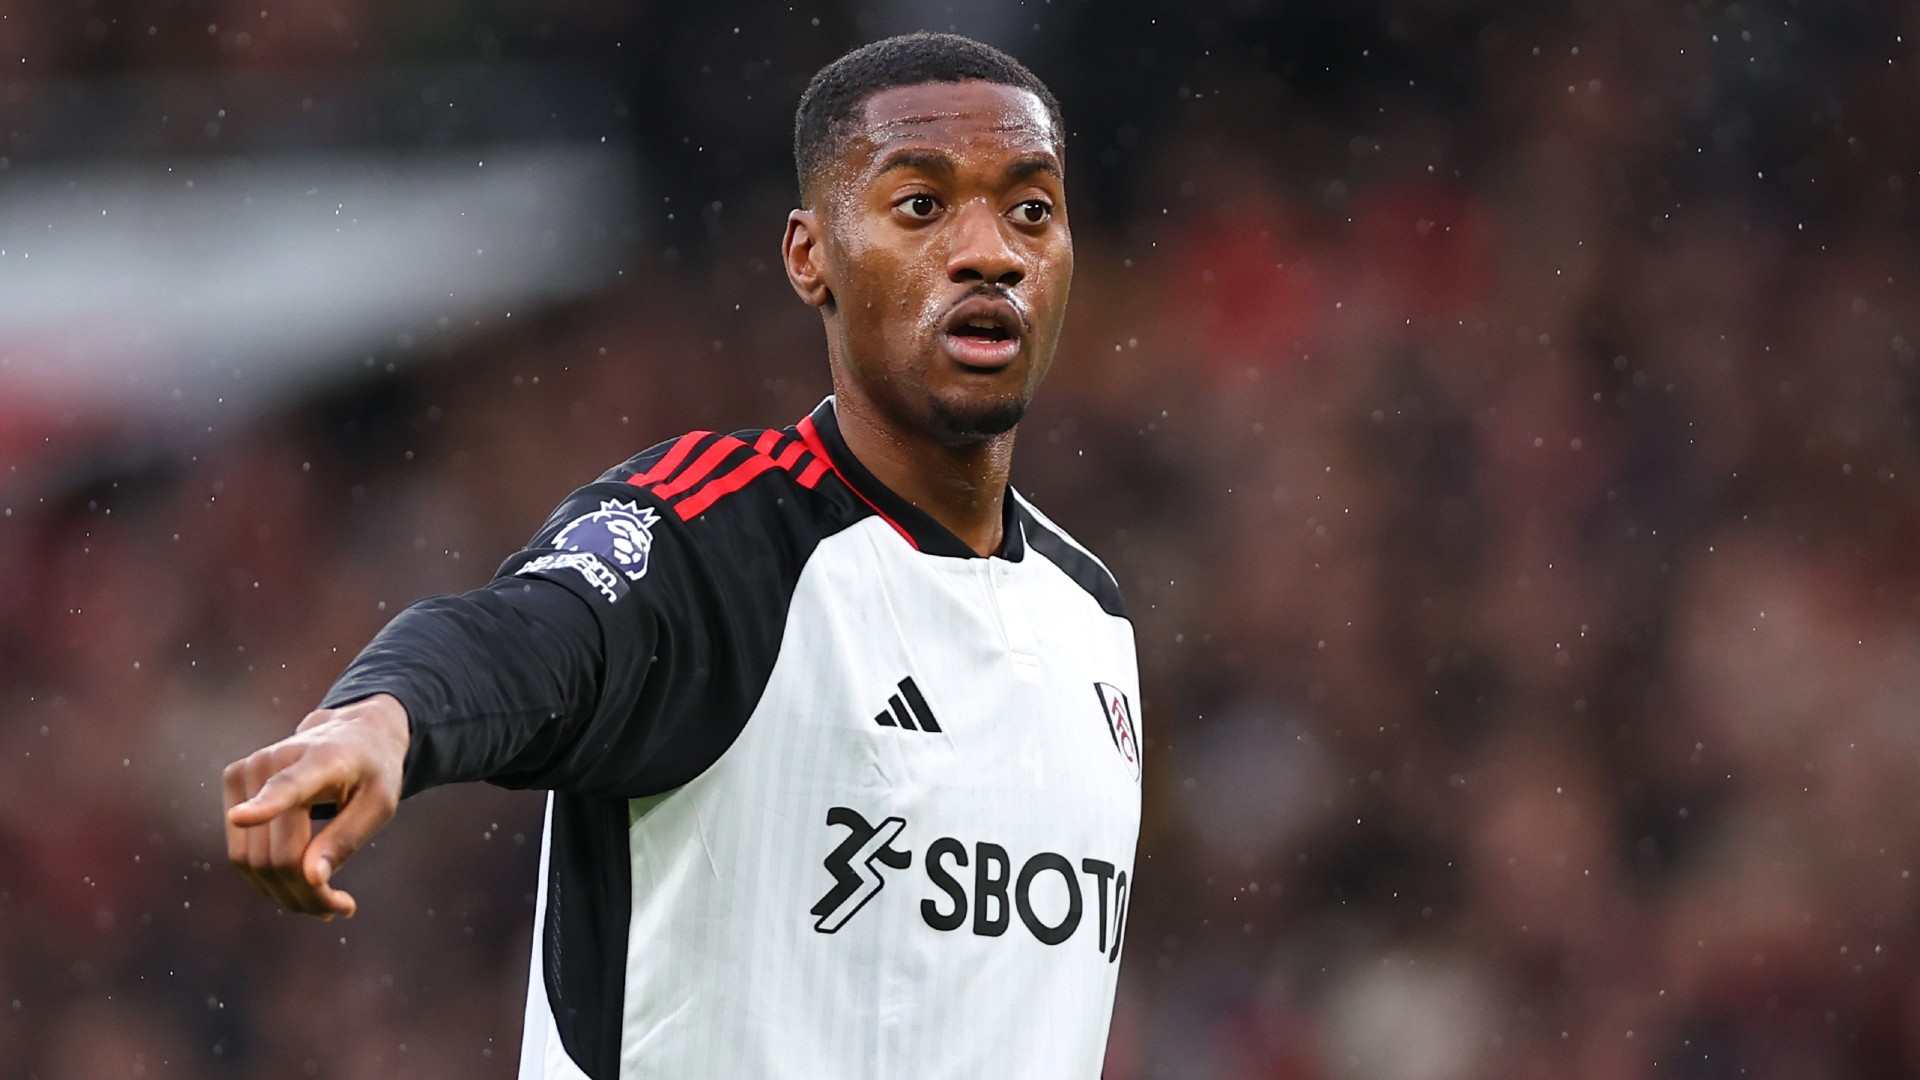 Tosin join Chelsea from Fulham